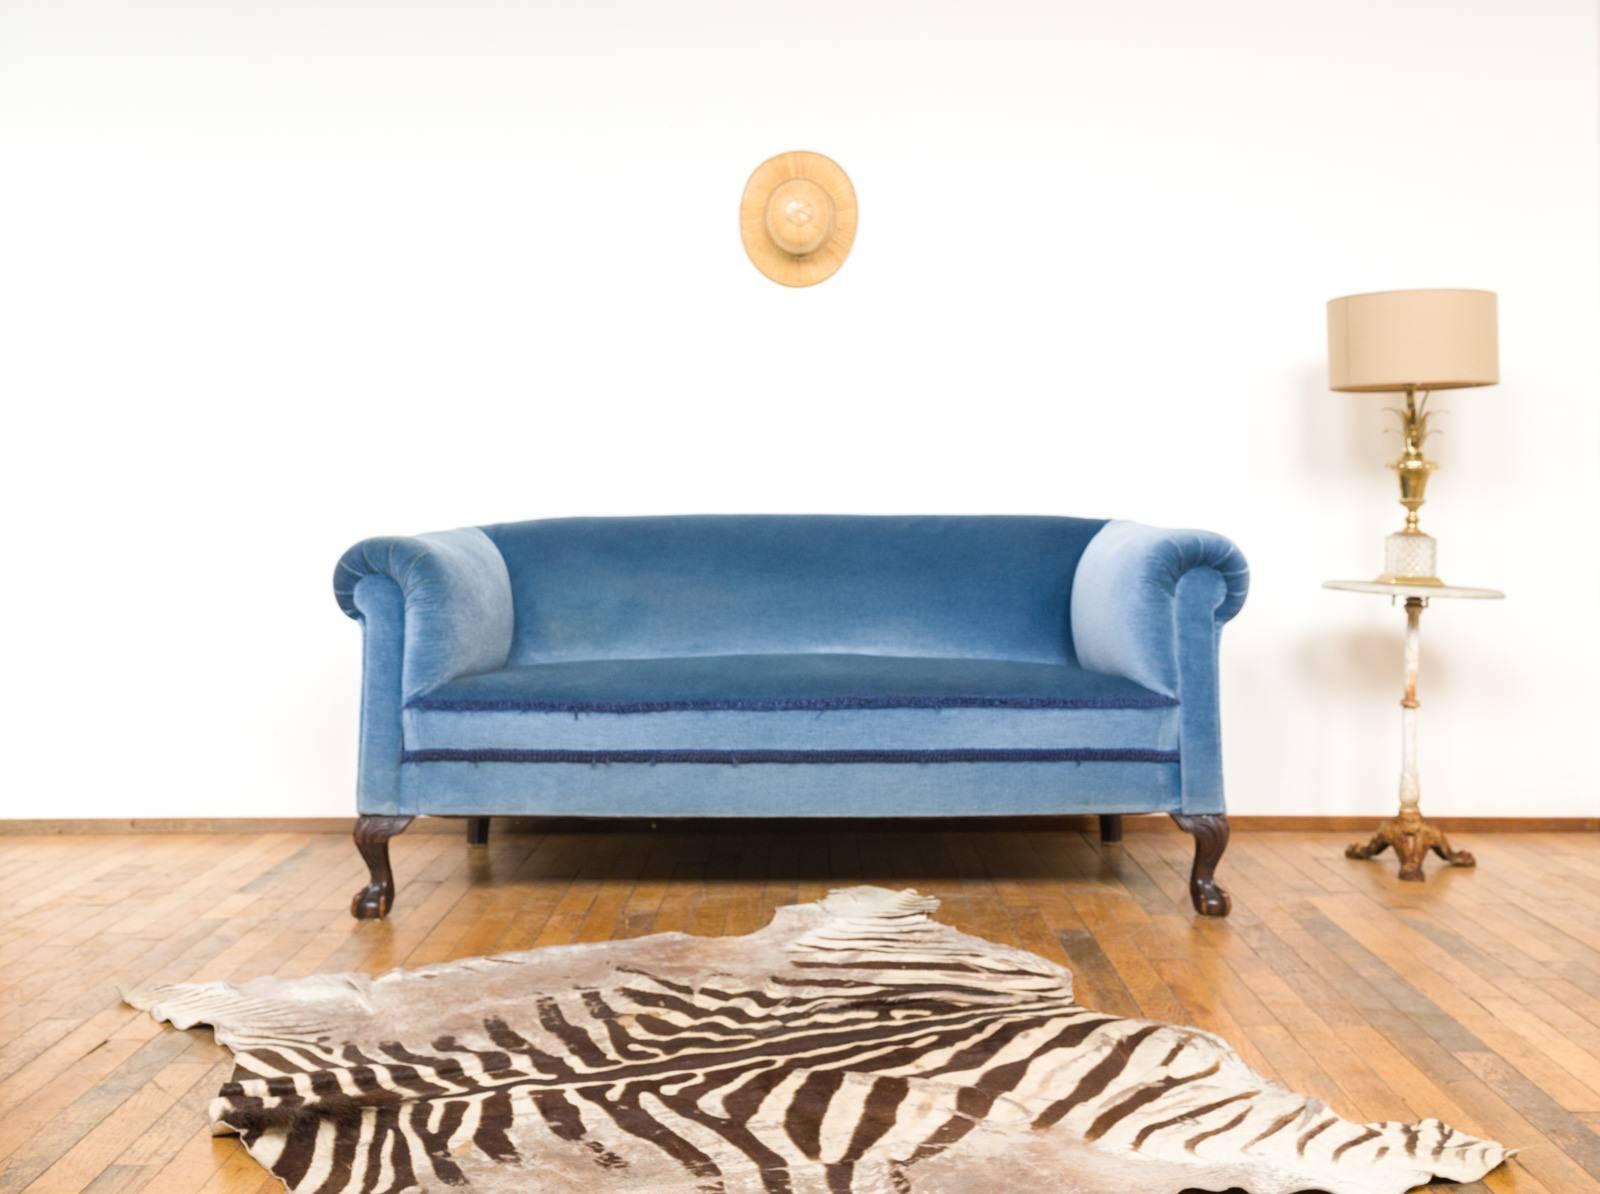 This elegant sofa dates from the early 20th century and has been fully restored and reupholstered in a beautiful, blue velvet. The sofa is mounted on detailed ball- and claw feet made out of mahogany.